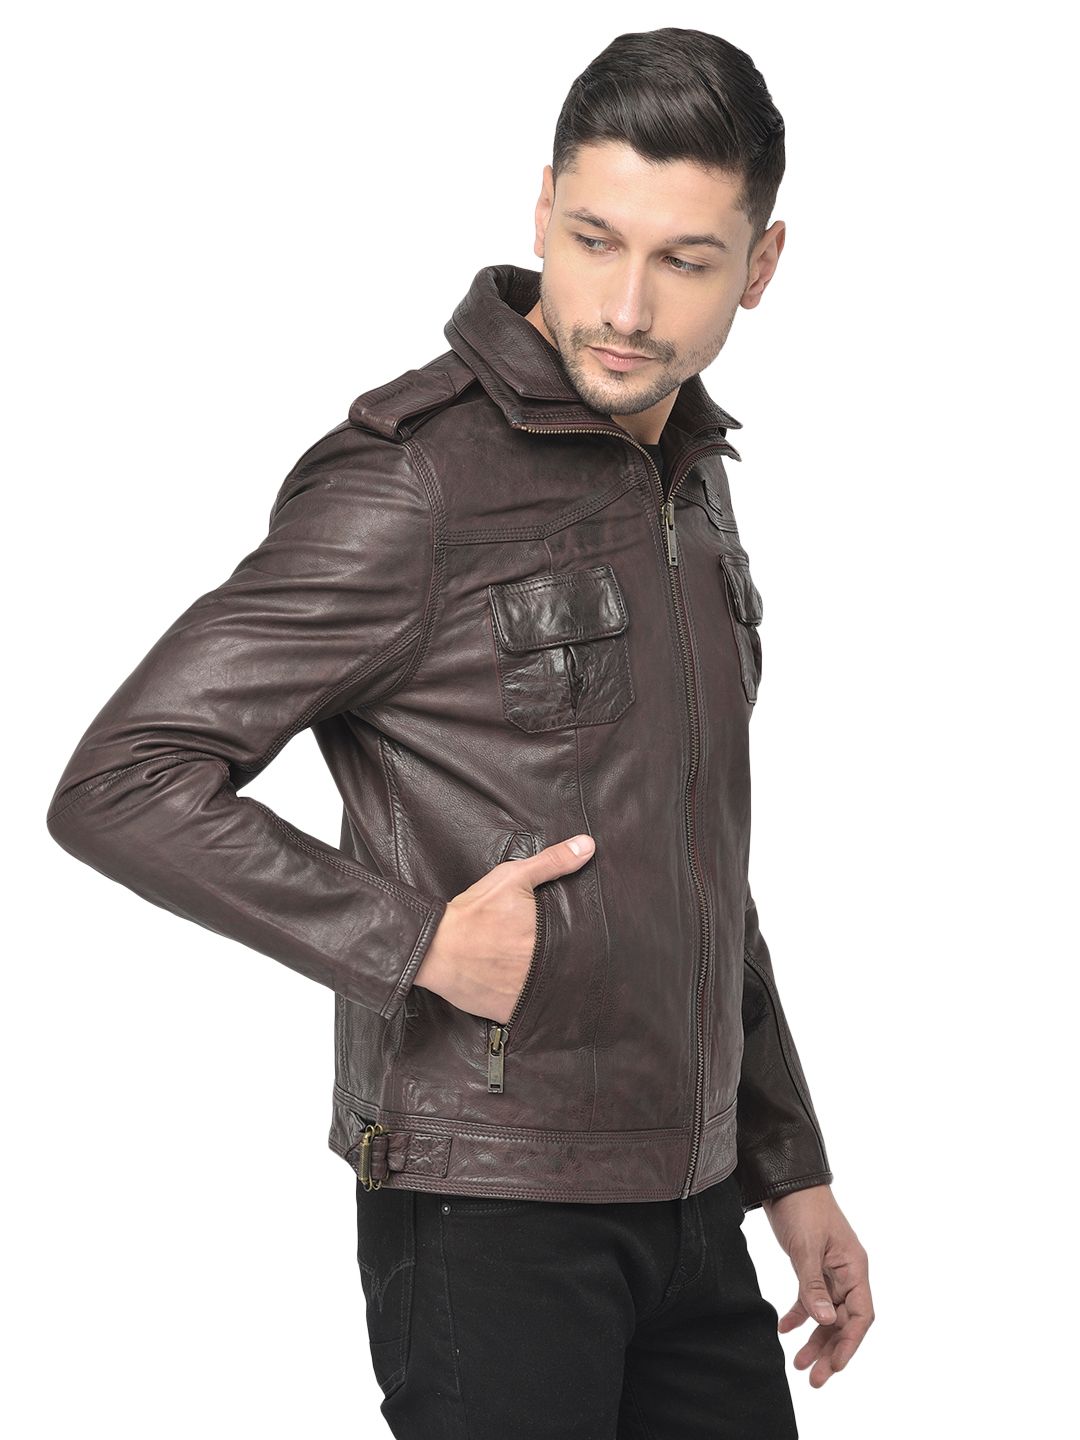 Cherry leather jacket for men